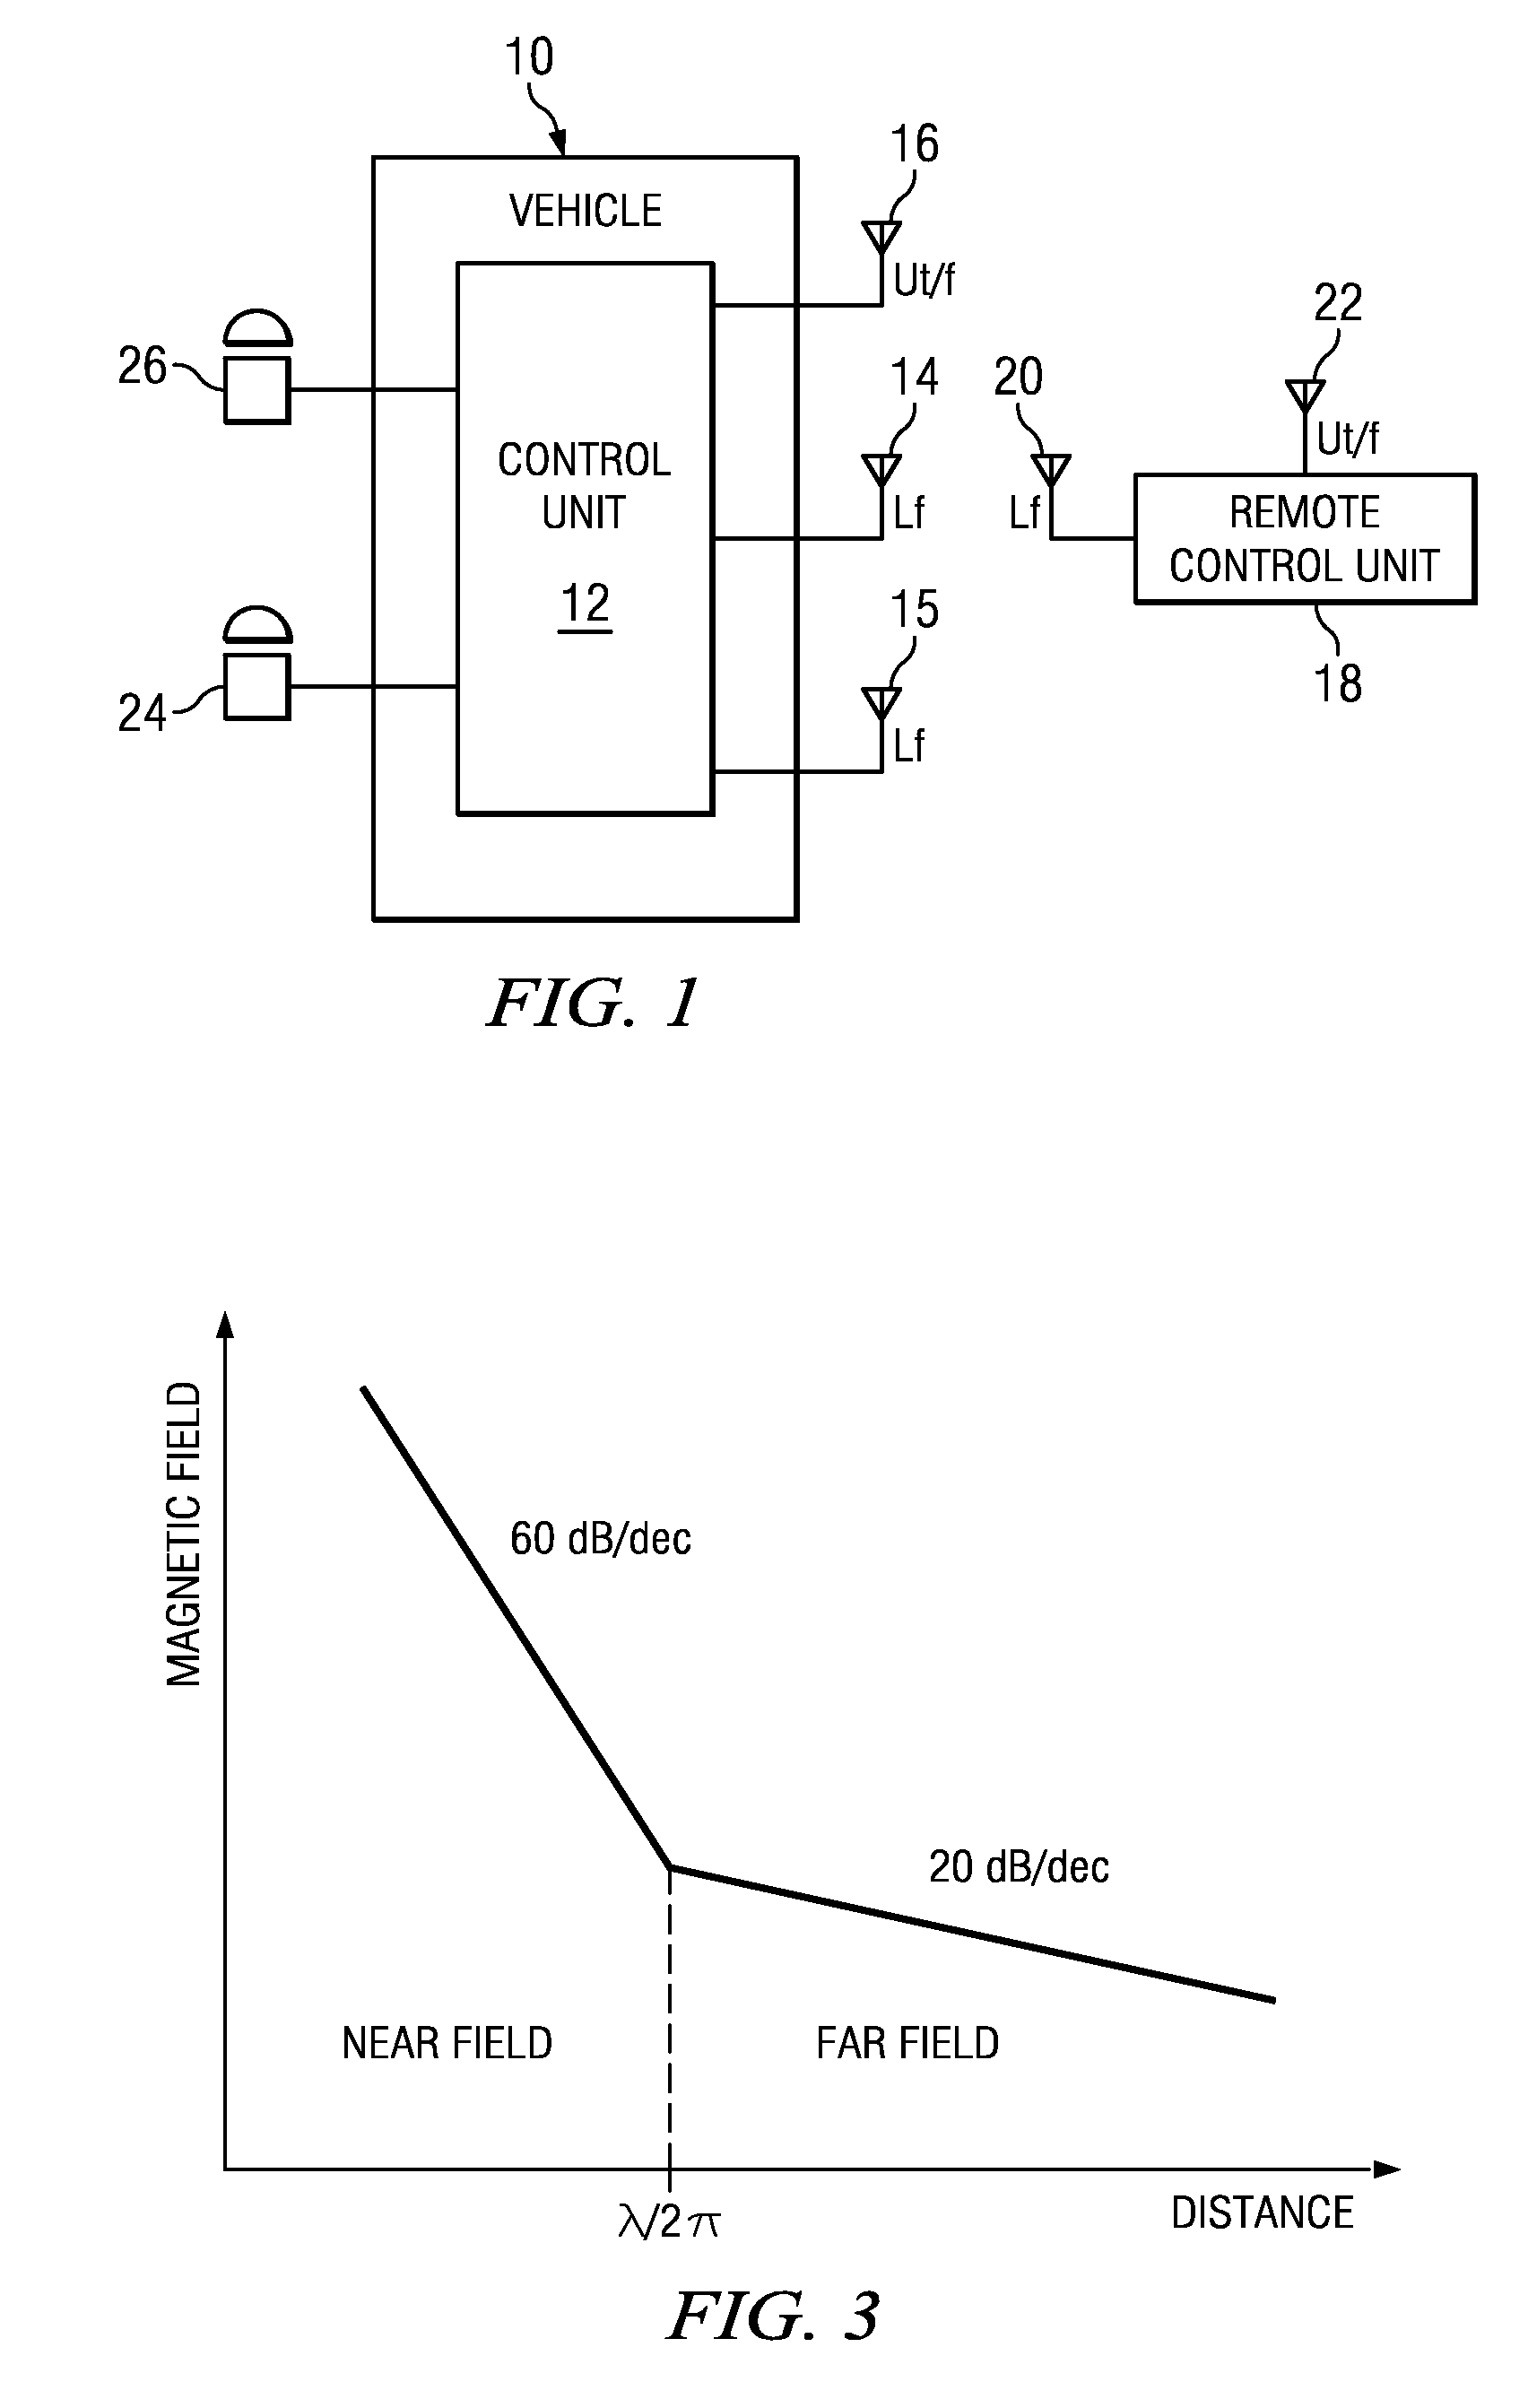 Wake Channel Indication for Passive Entry System